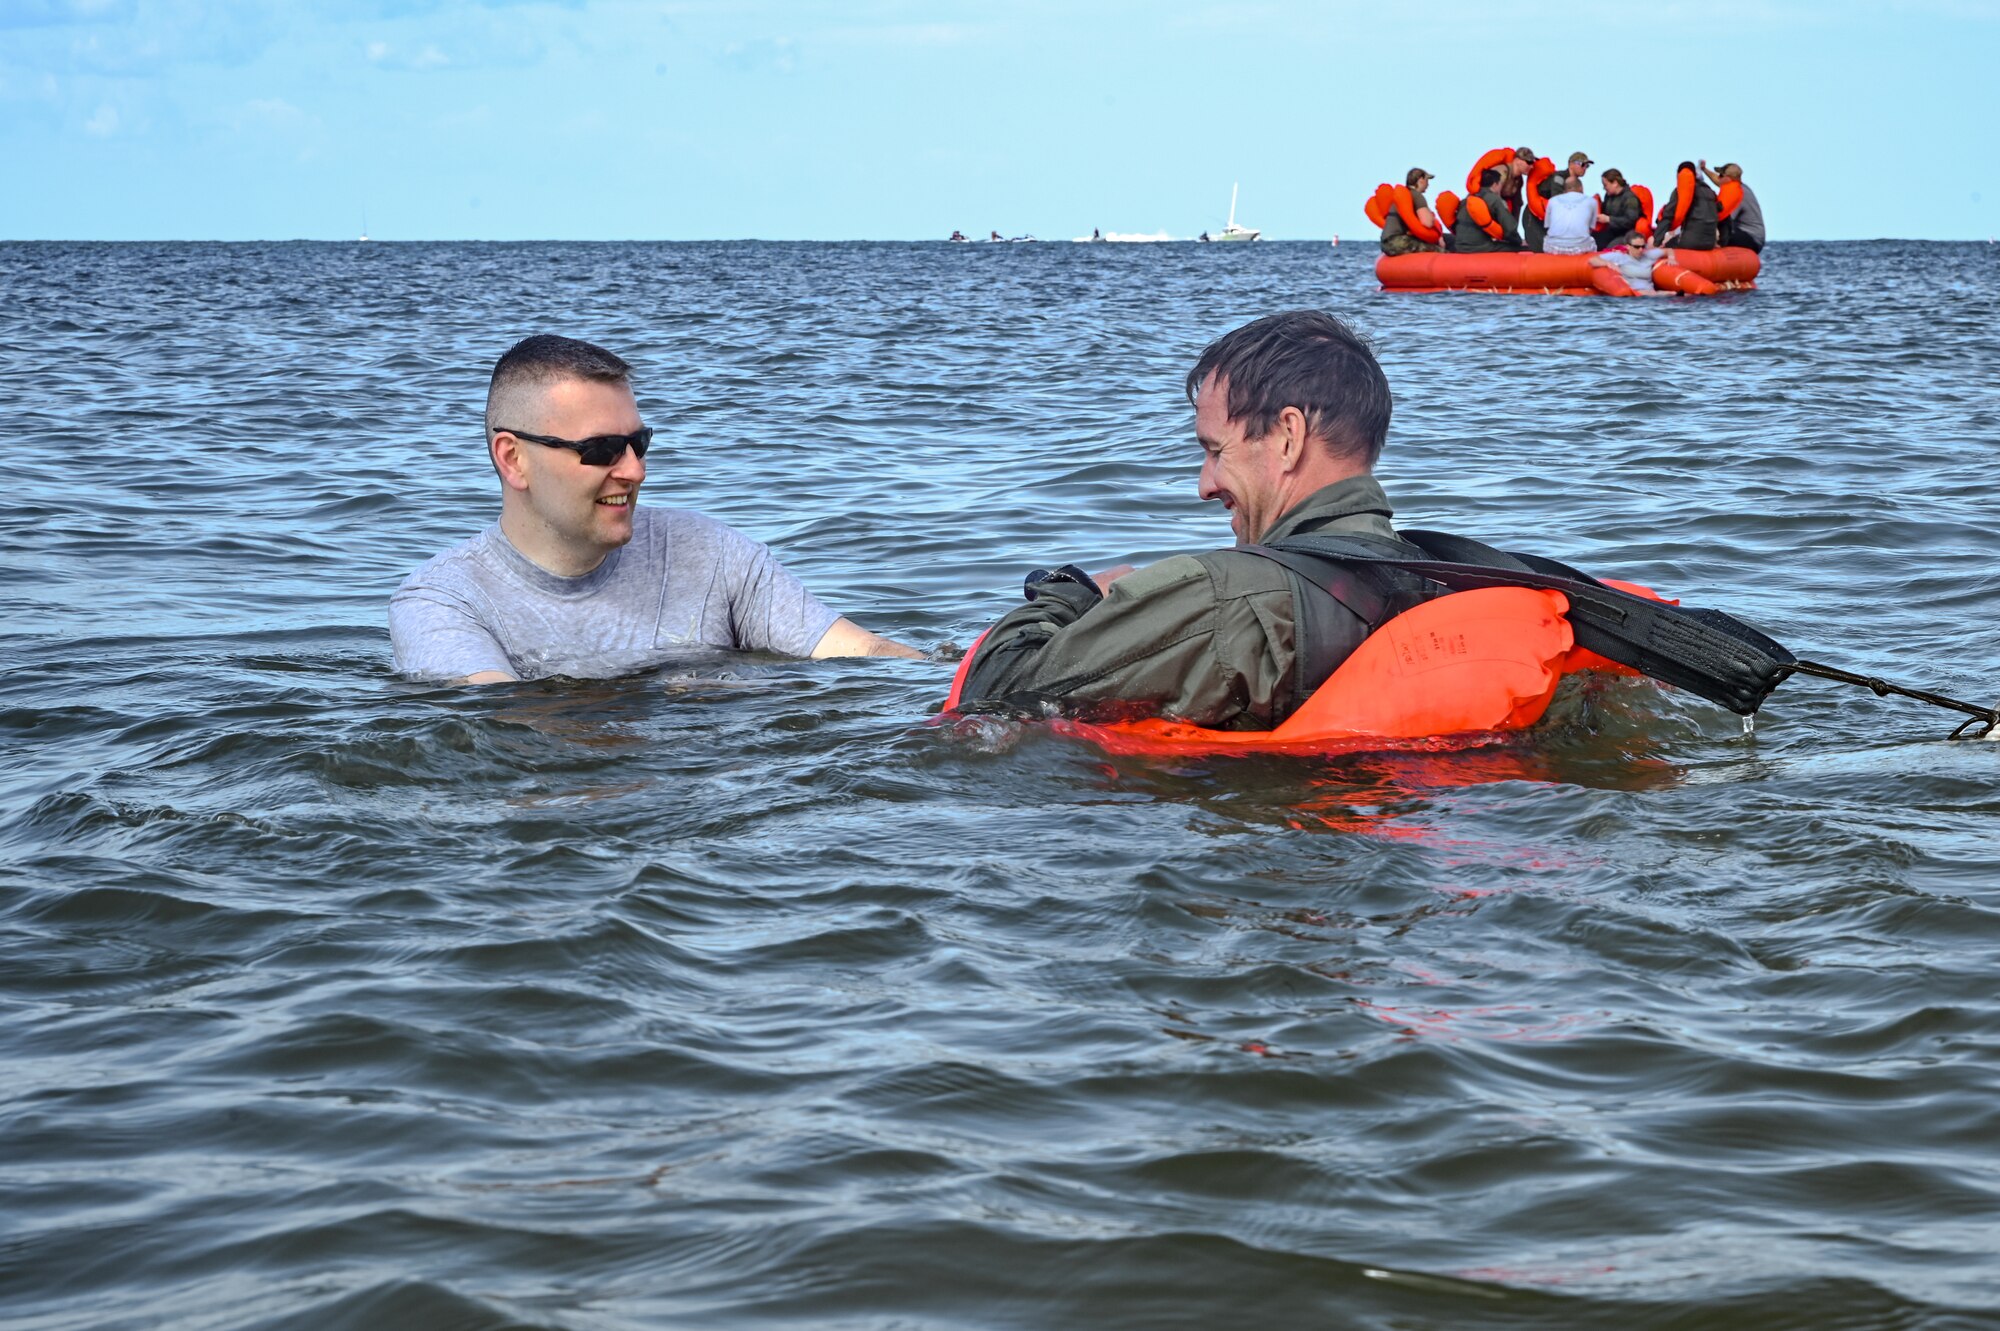 Reserve Citizen Airmen assigned to the 910th Airlift Wing participated in water survival training on April 19, 2023, at Naval Air Station Key West, Florida.